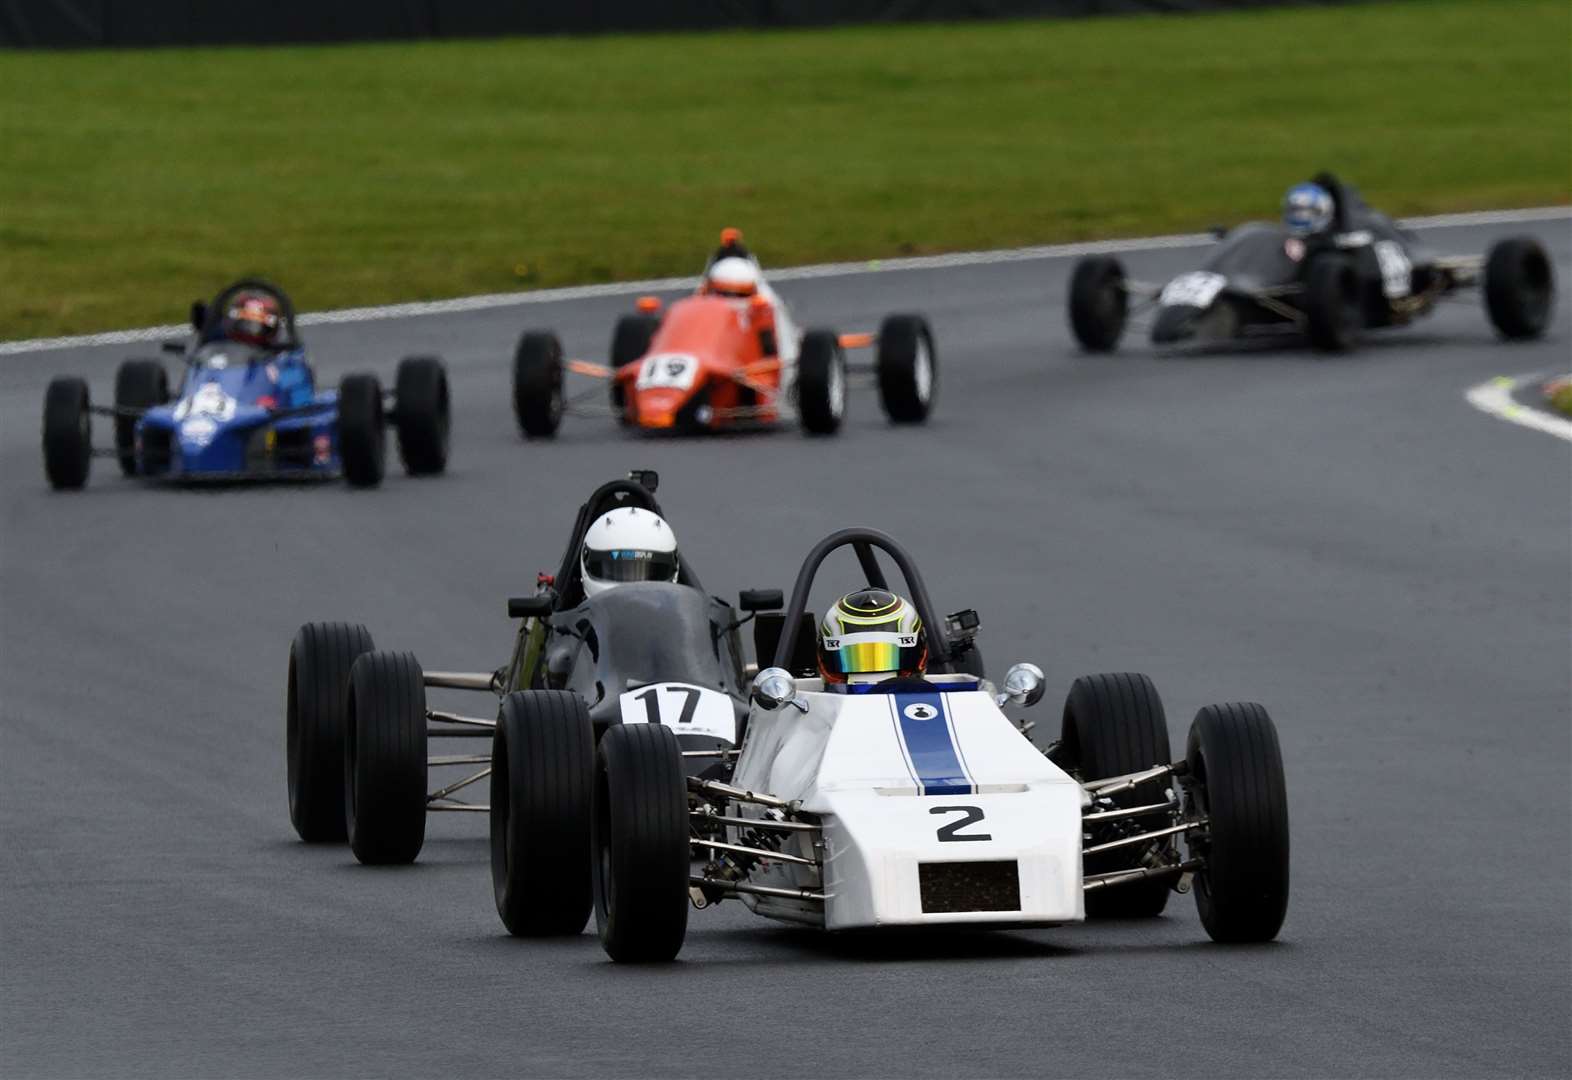 Ben Powney, from Hythe, made his Formula Ford debut, winning the Classic class in both races. Picture: Simon Hildrew